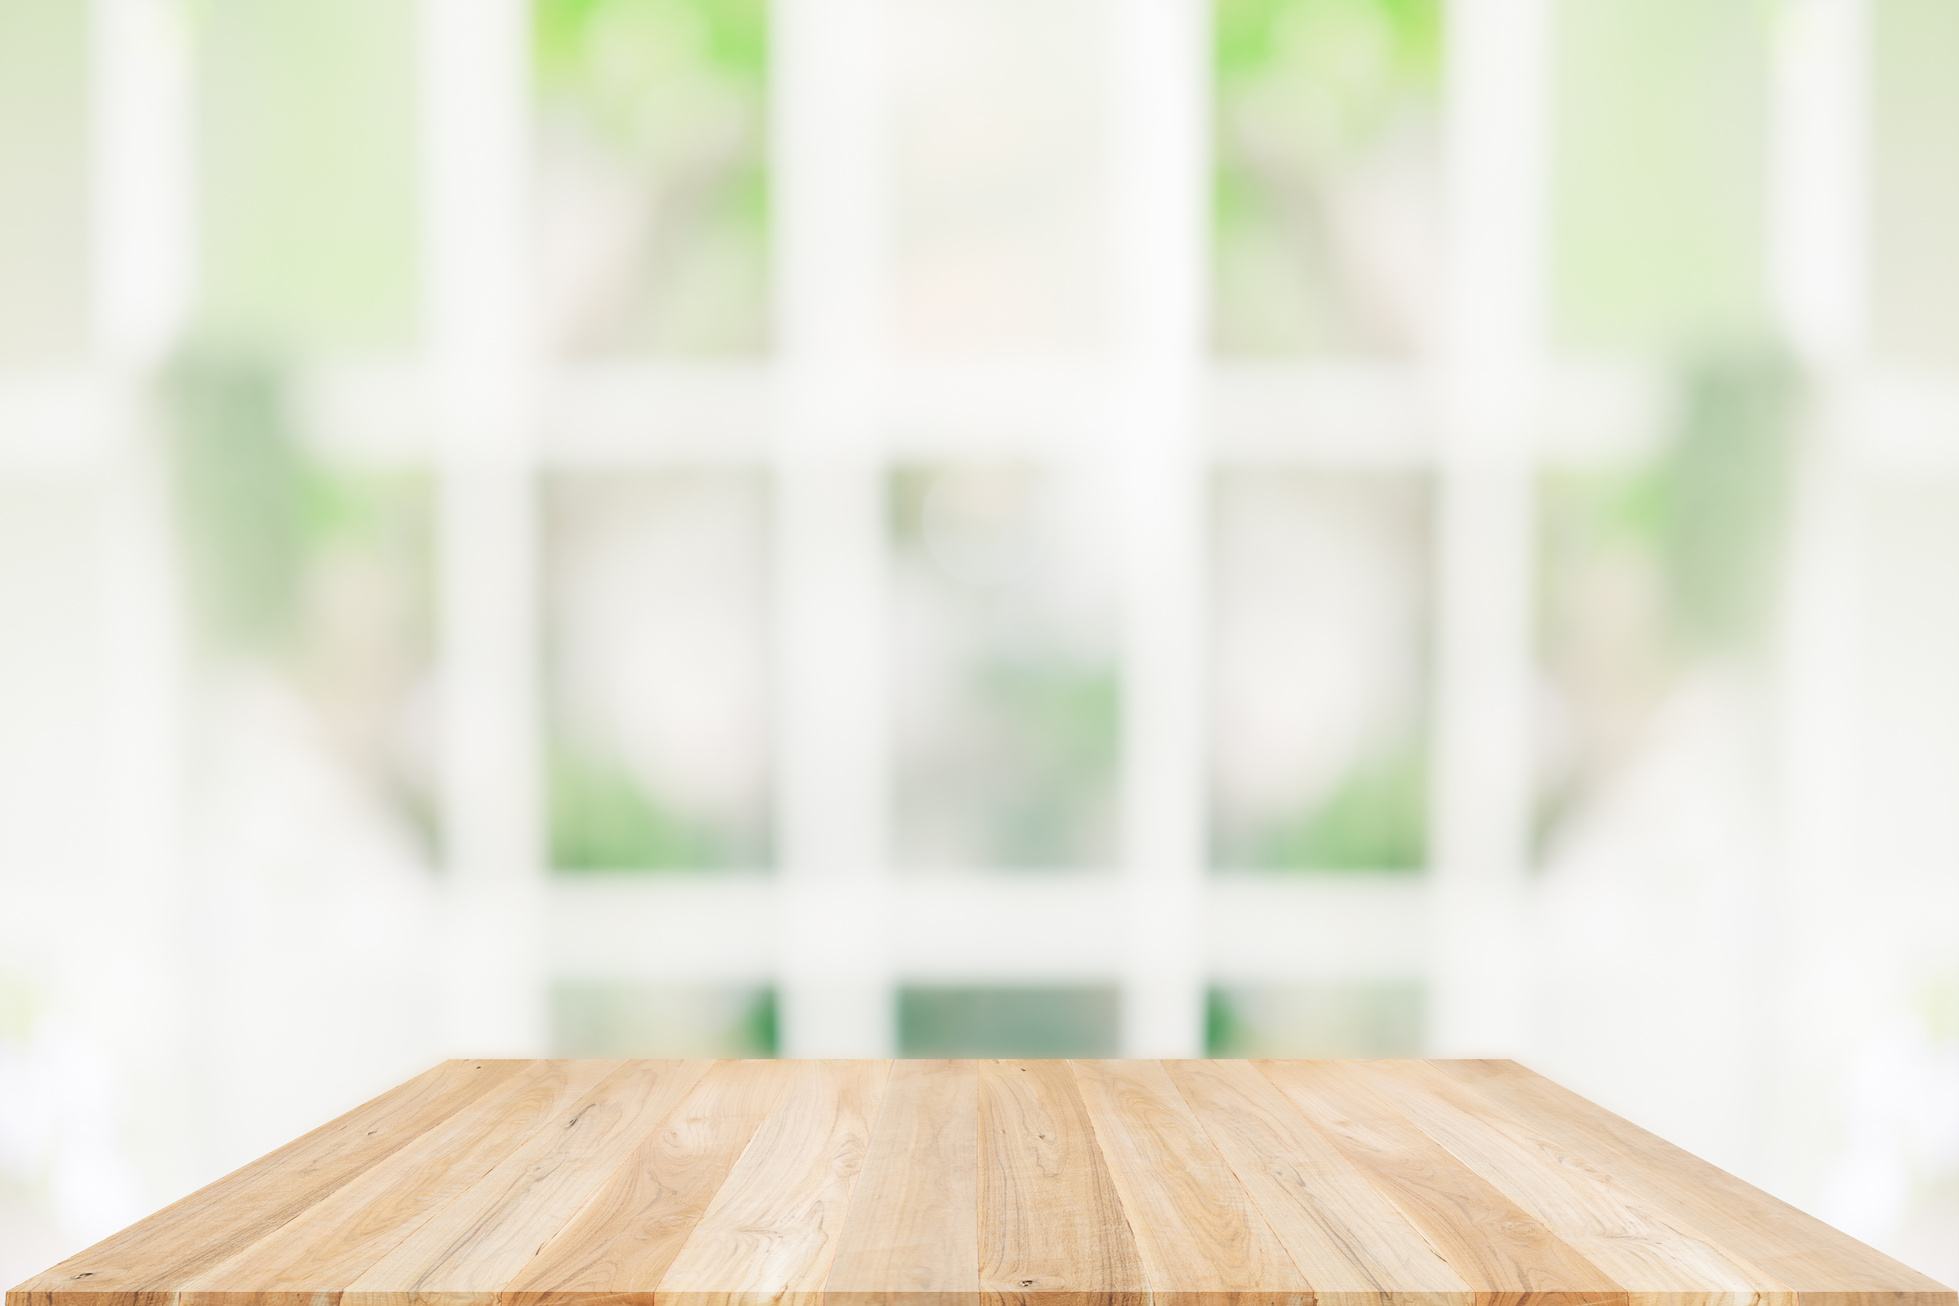 Empty Wooden Table and Blurred Window Interior Background